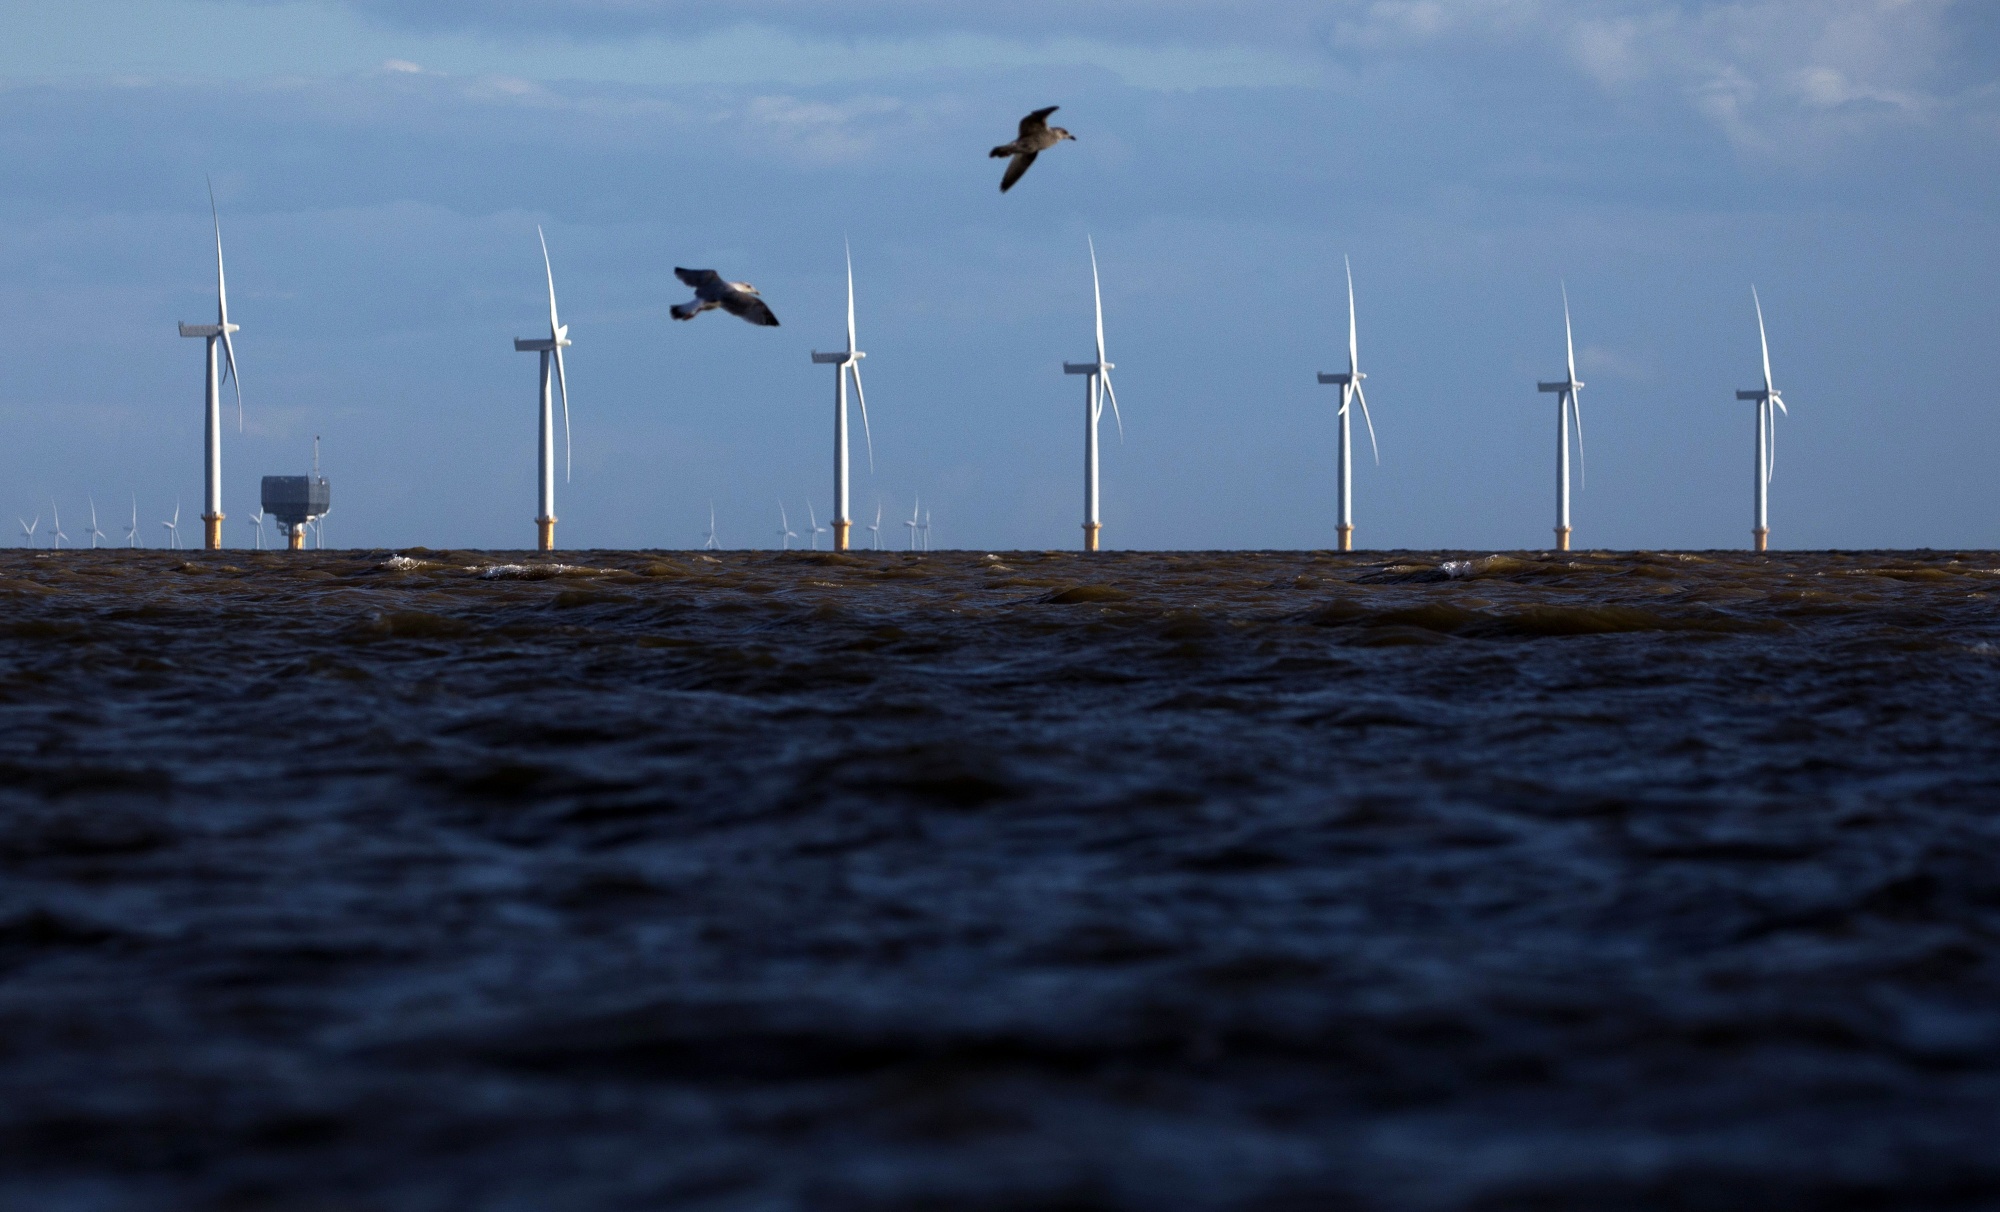 Offshore wind turbines off the coast in Clacton On Sea, UK.